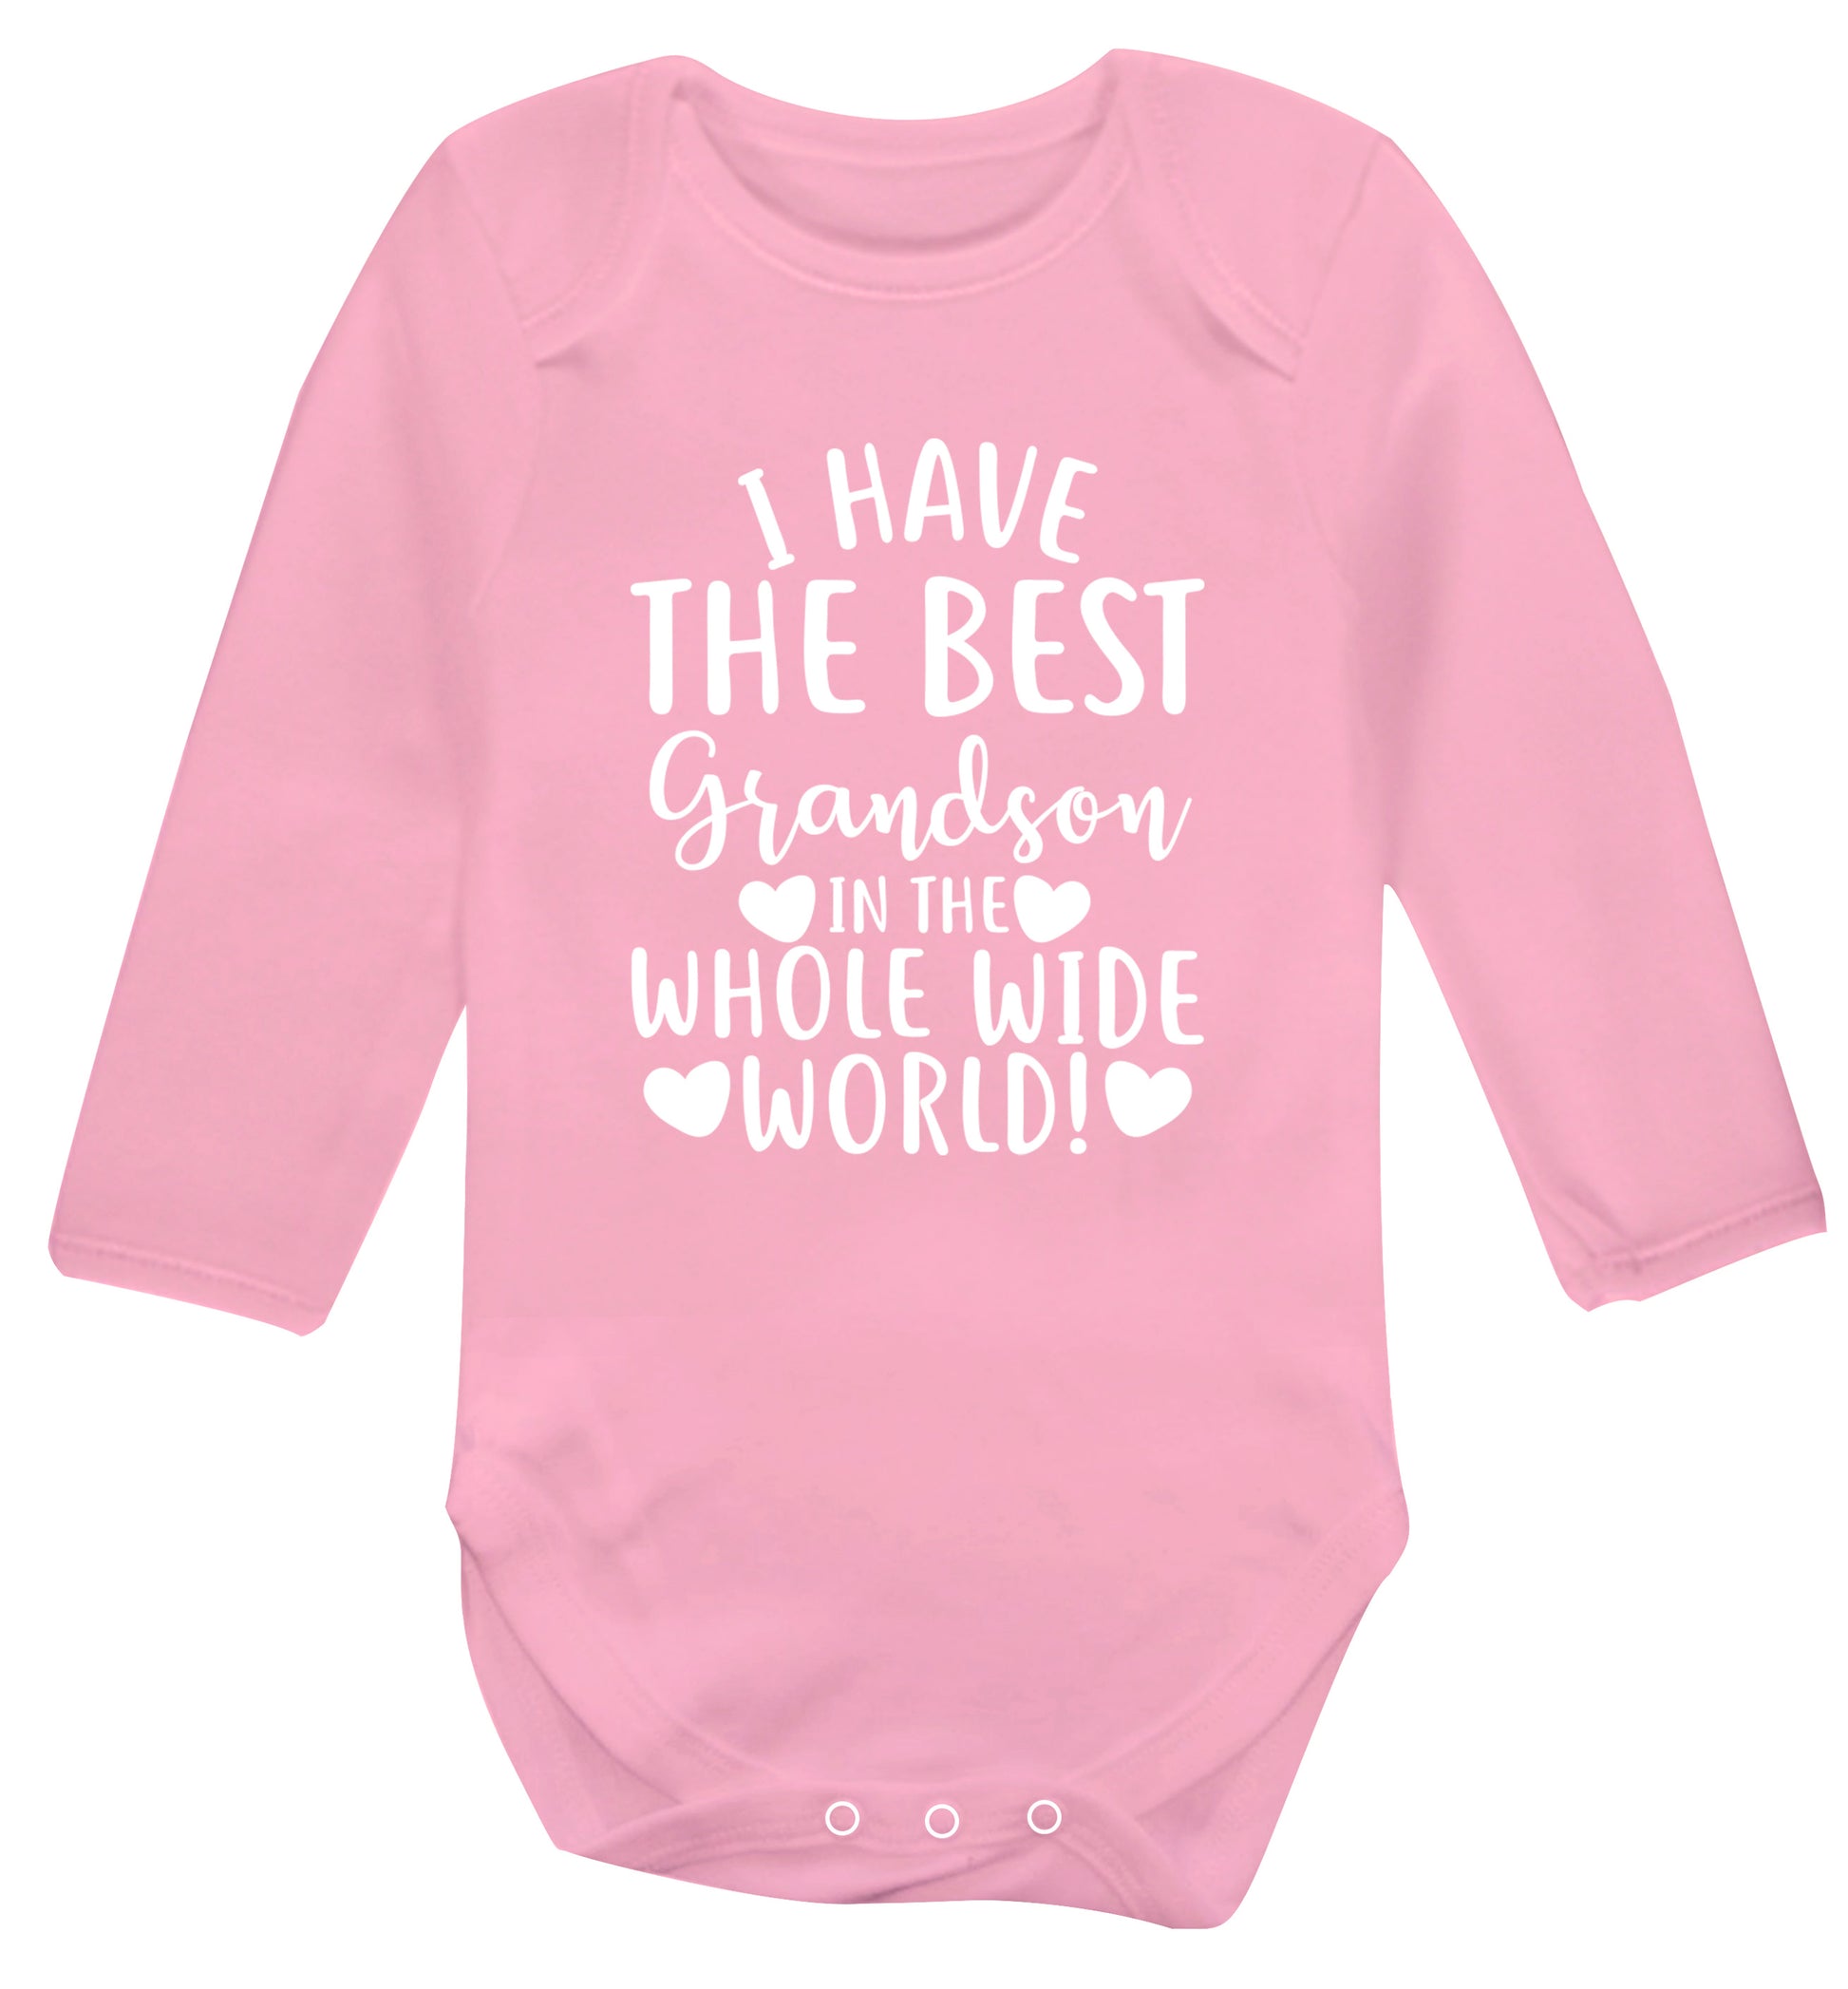 I have the best grandson in the whole wide world! Baby Vest long sleeved pale pink 6-12 months